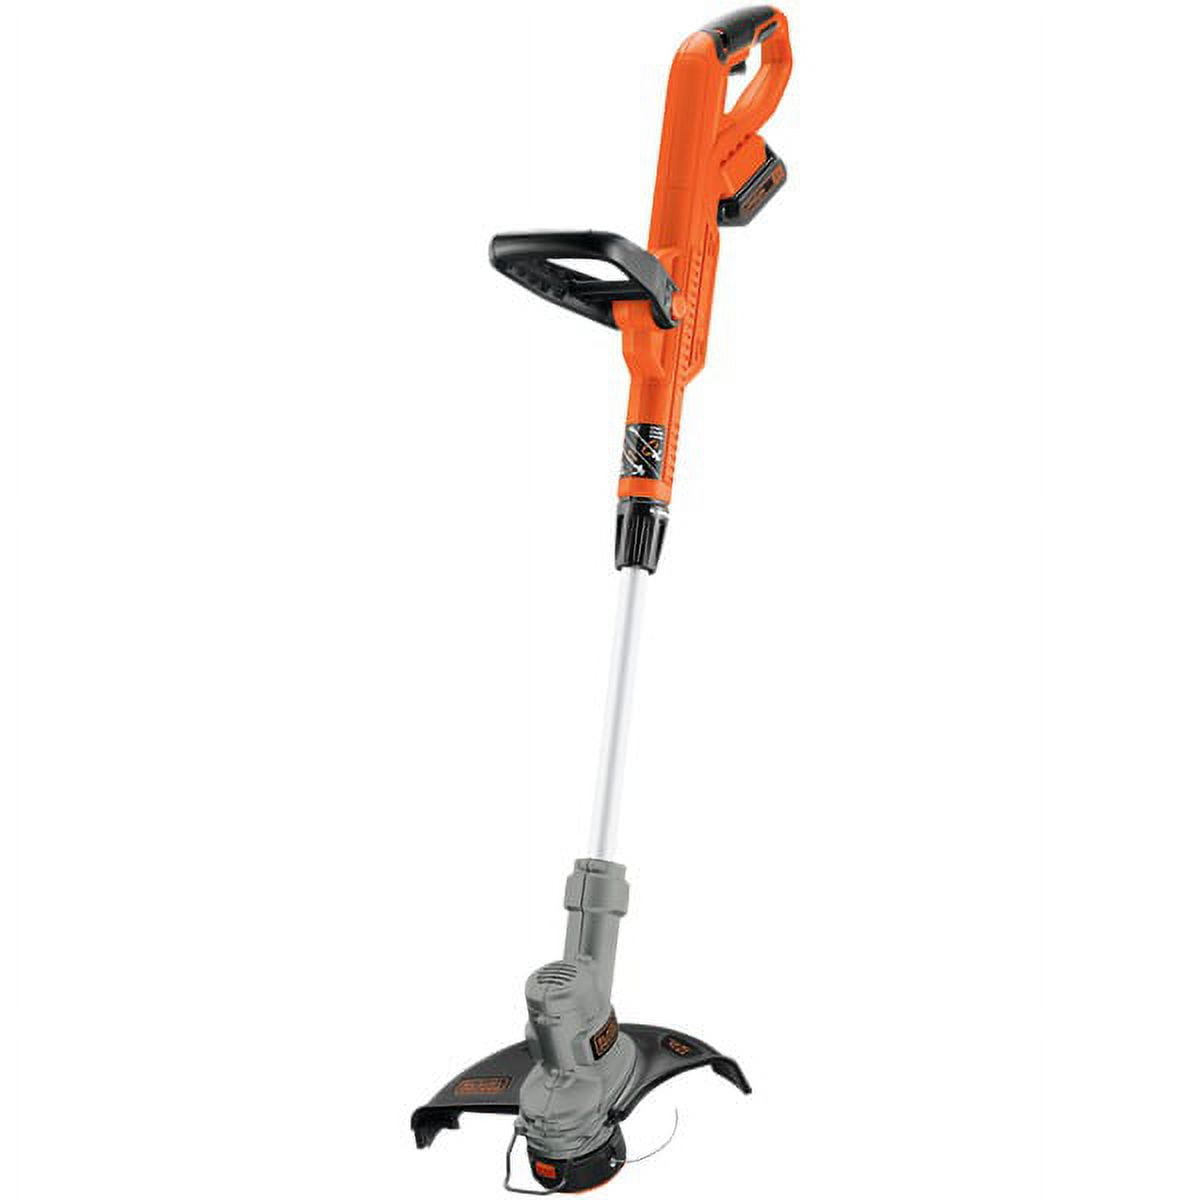 BLACK+DECKER 20V MAX String Trimmer and Edger, Cordless, 12 Inch, 2-Speed  Control, 2 Batteries, Charger, and Spool Included $39.99 Shipped